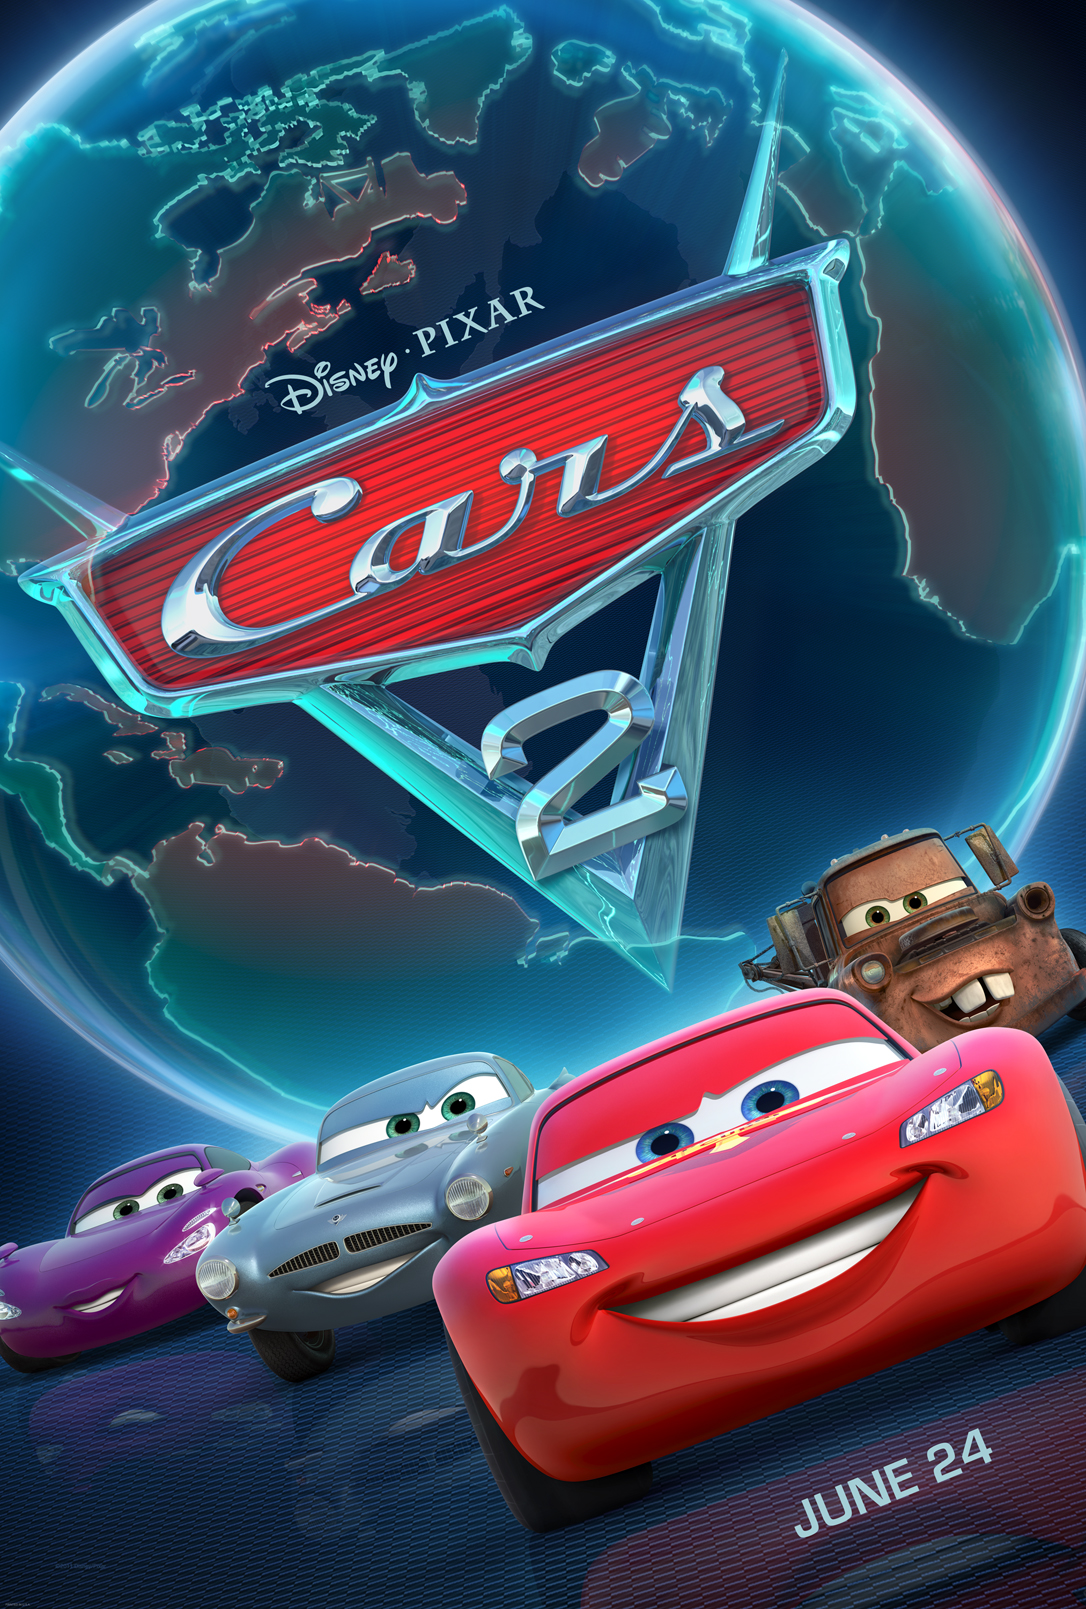 Image result for cars 2 poster